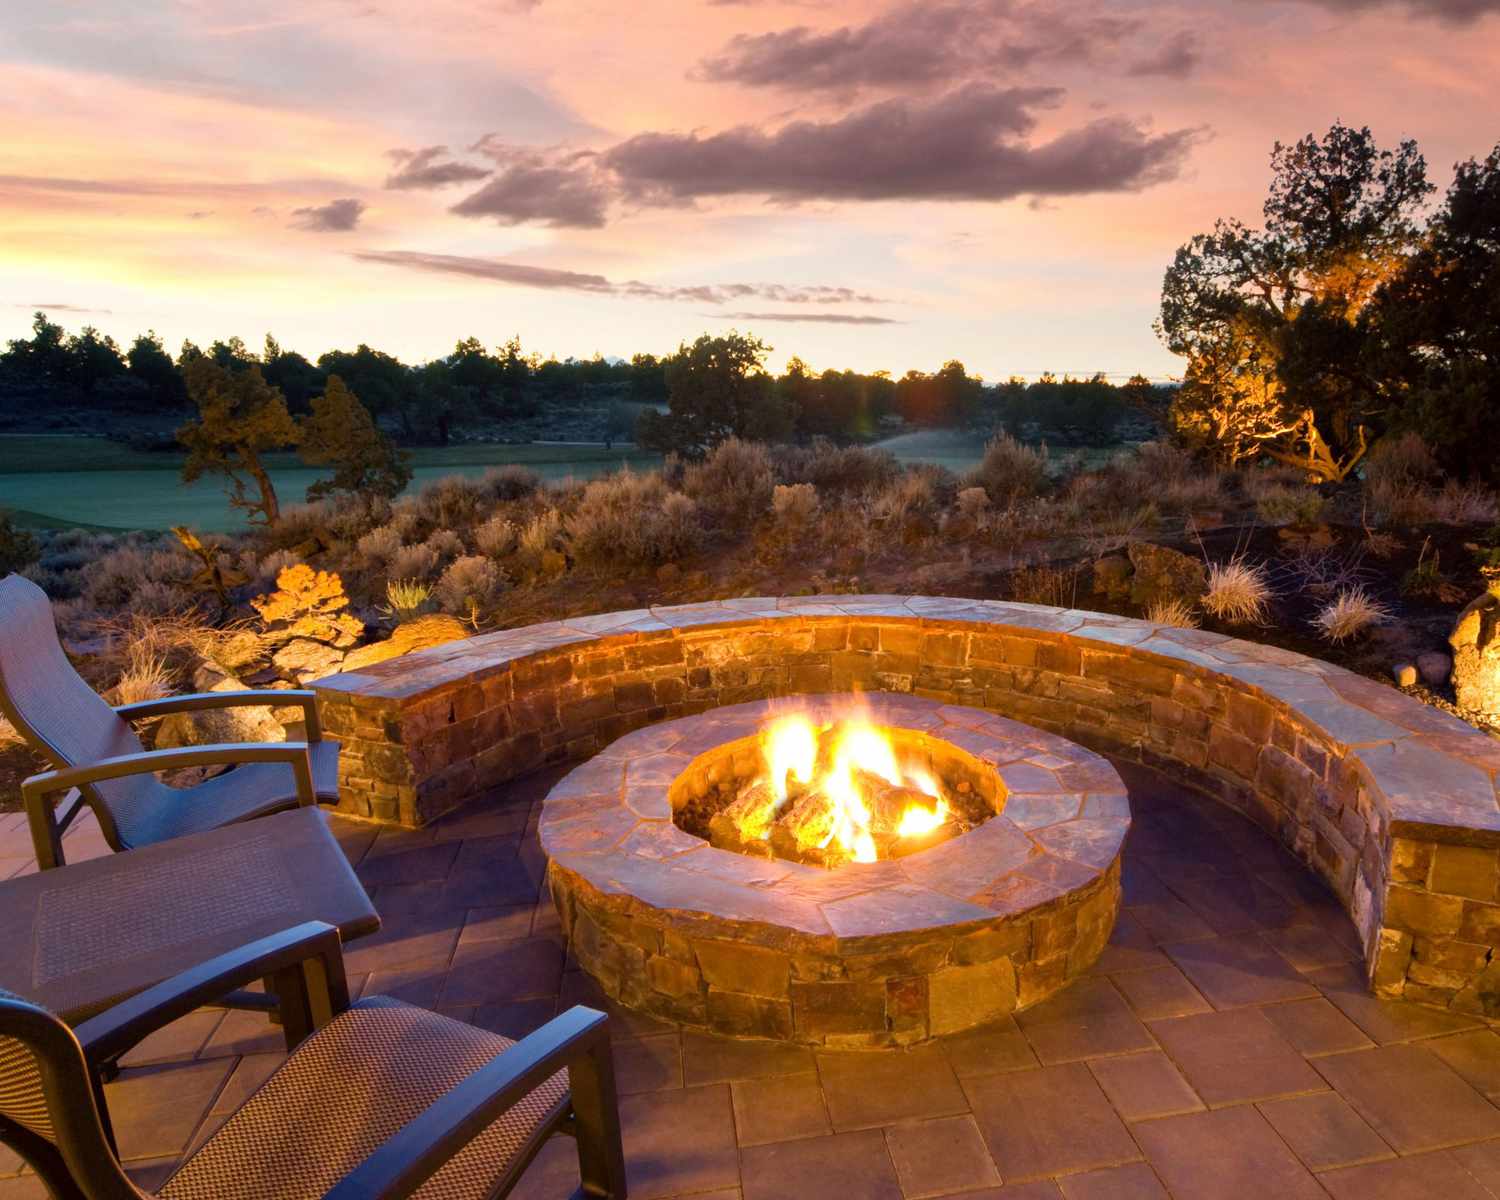 Diy Fire Pit Martha Stewart, Outdoor Fire Pit Build Your Own